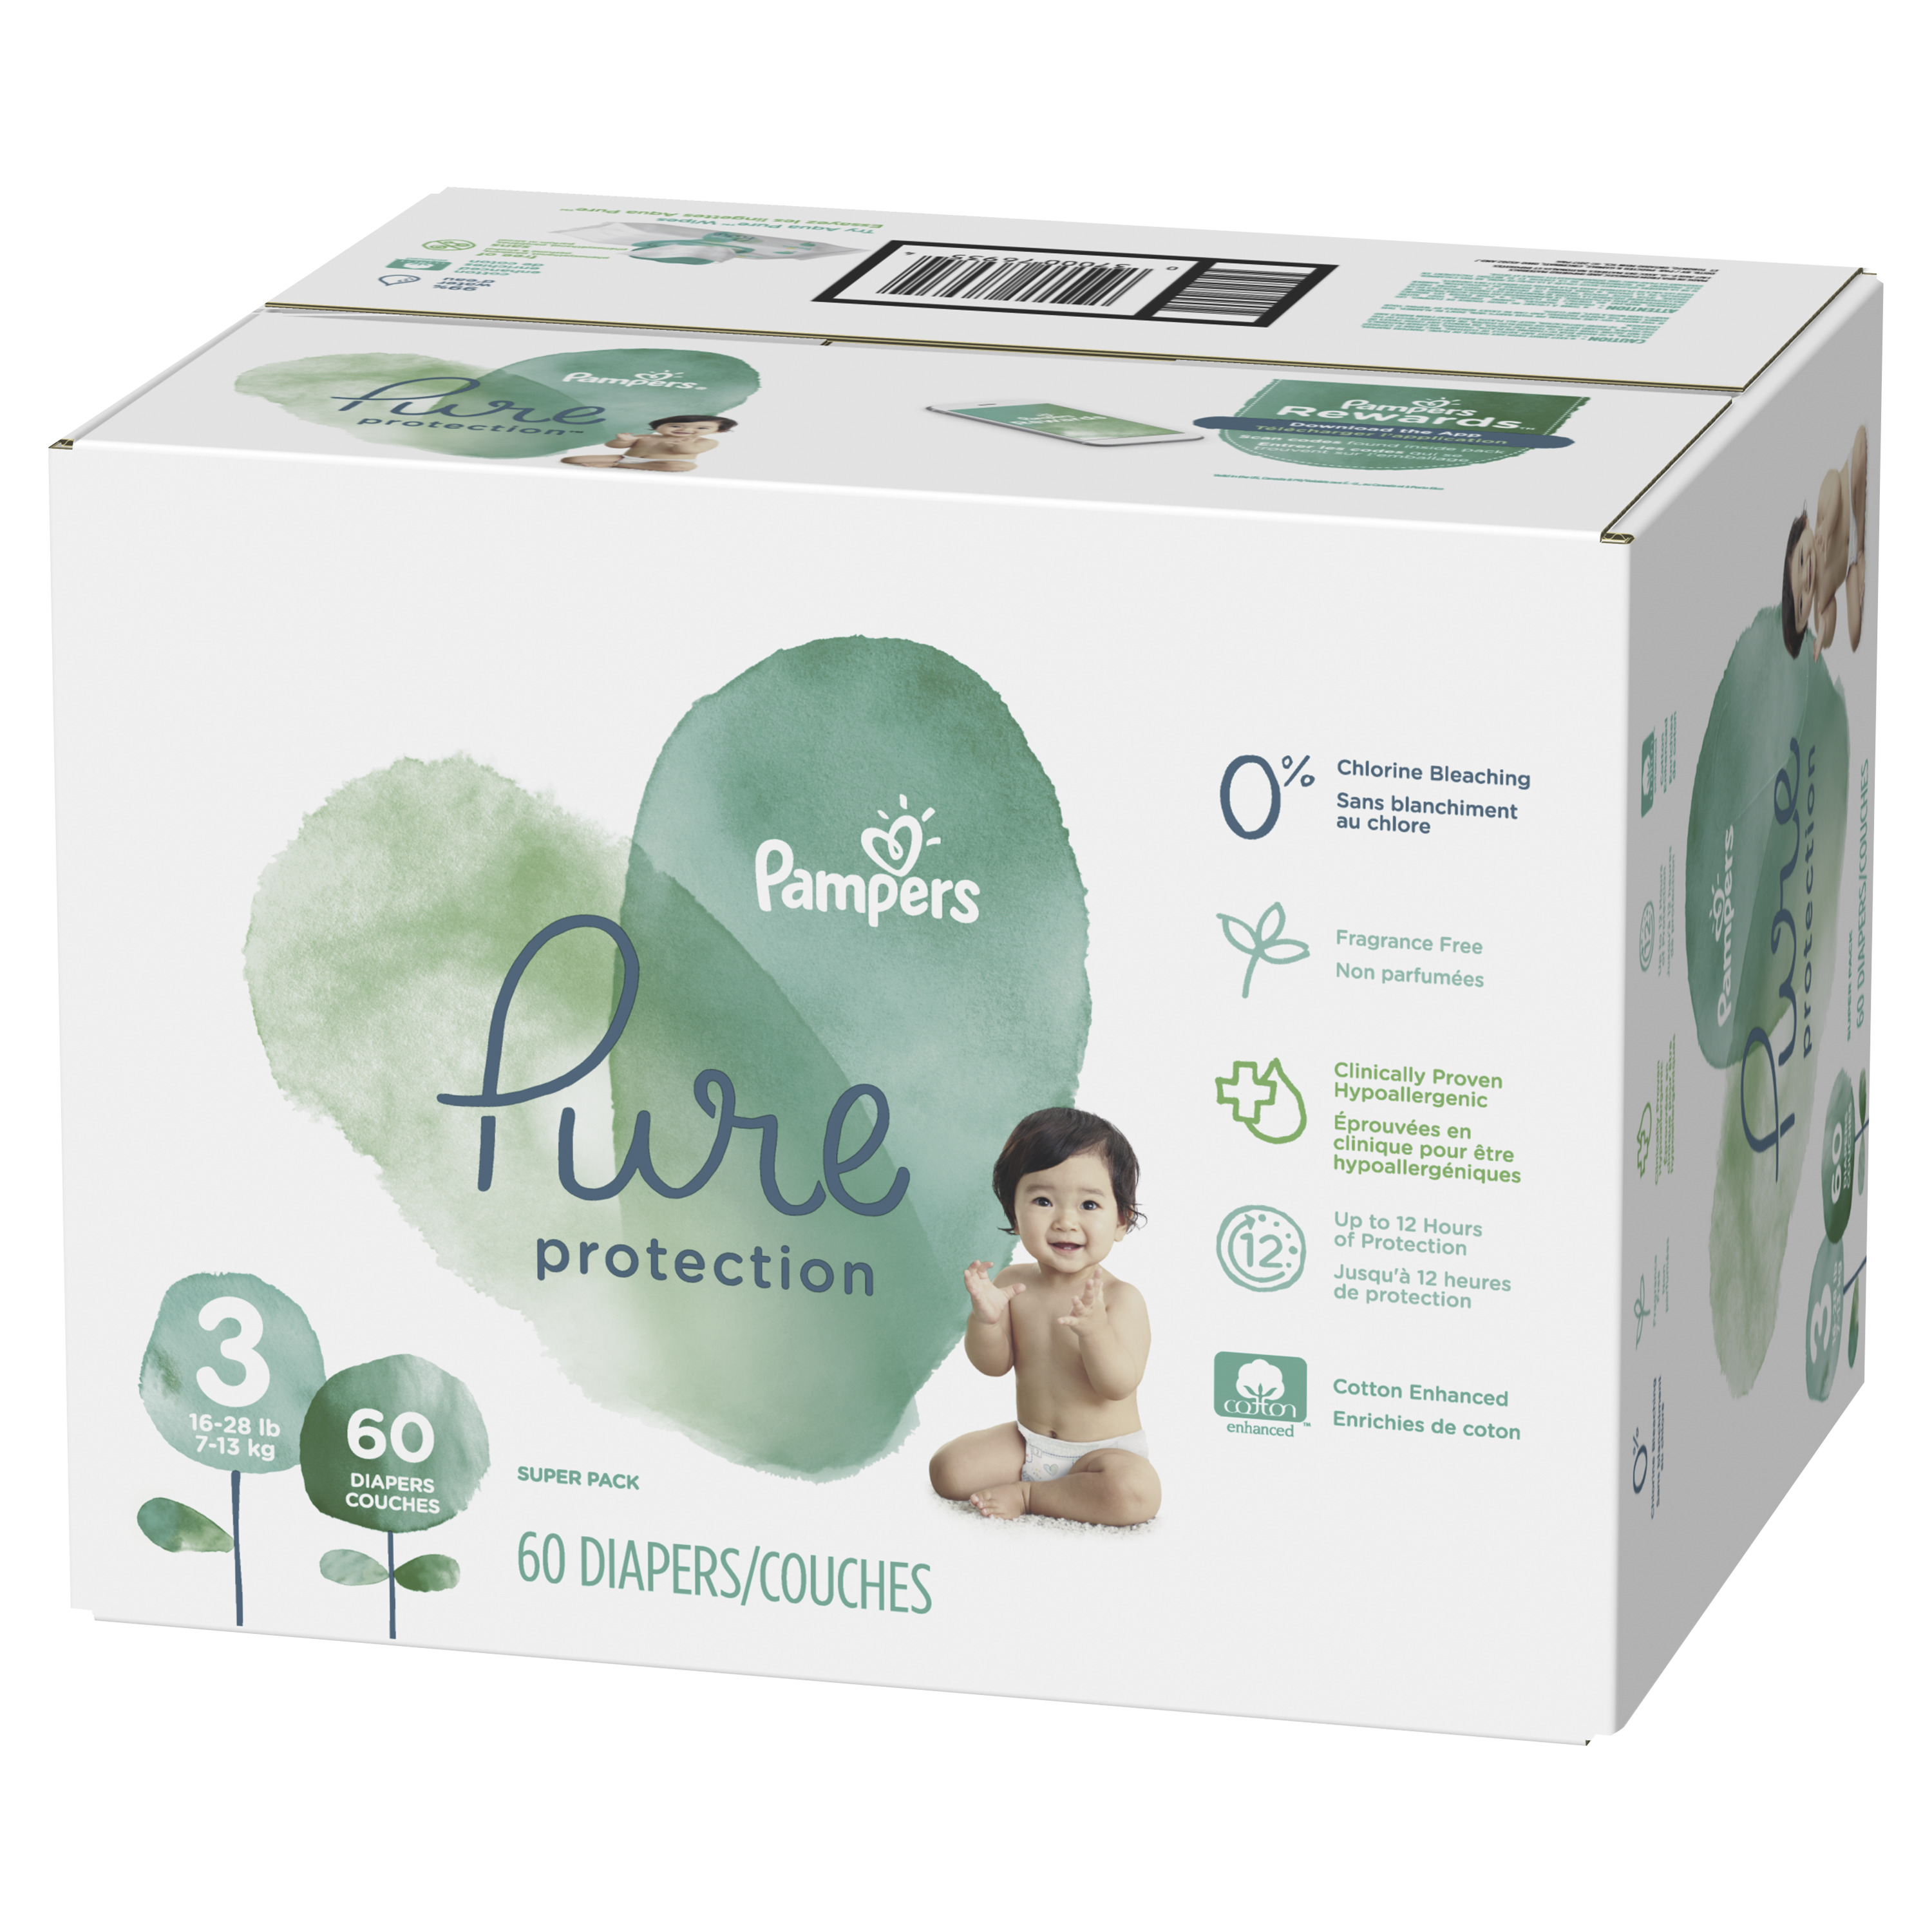 Pampers Pure Protection Natural Diapers, Size 3, 60 ct - image 11 of 13